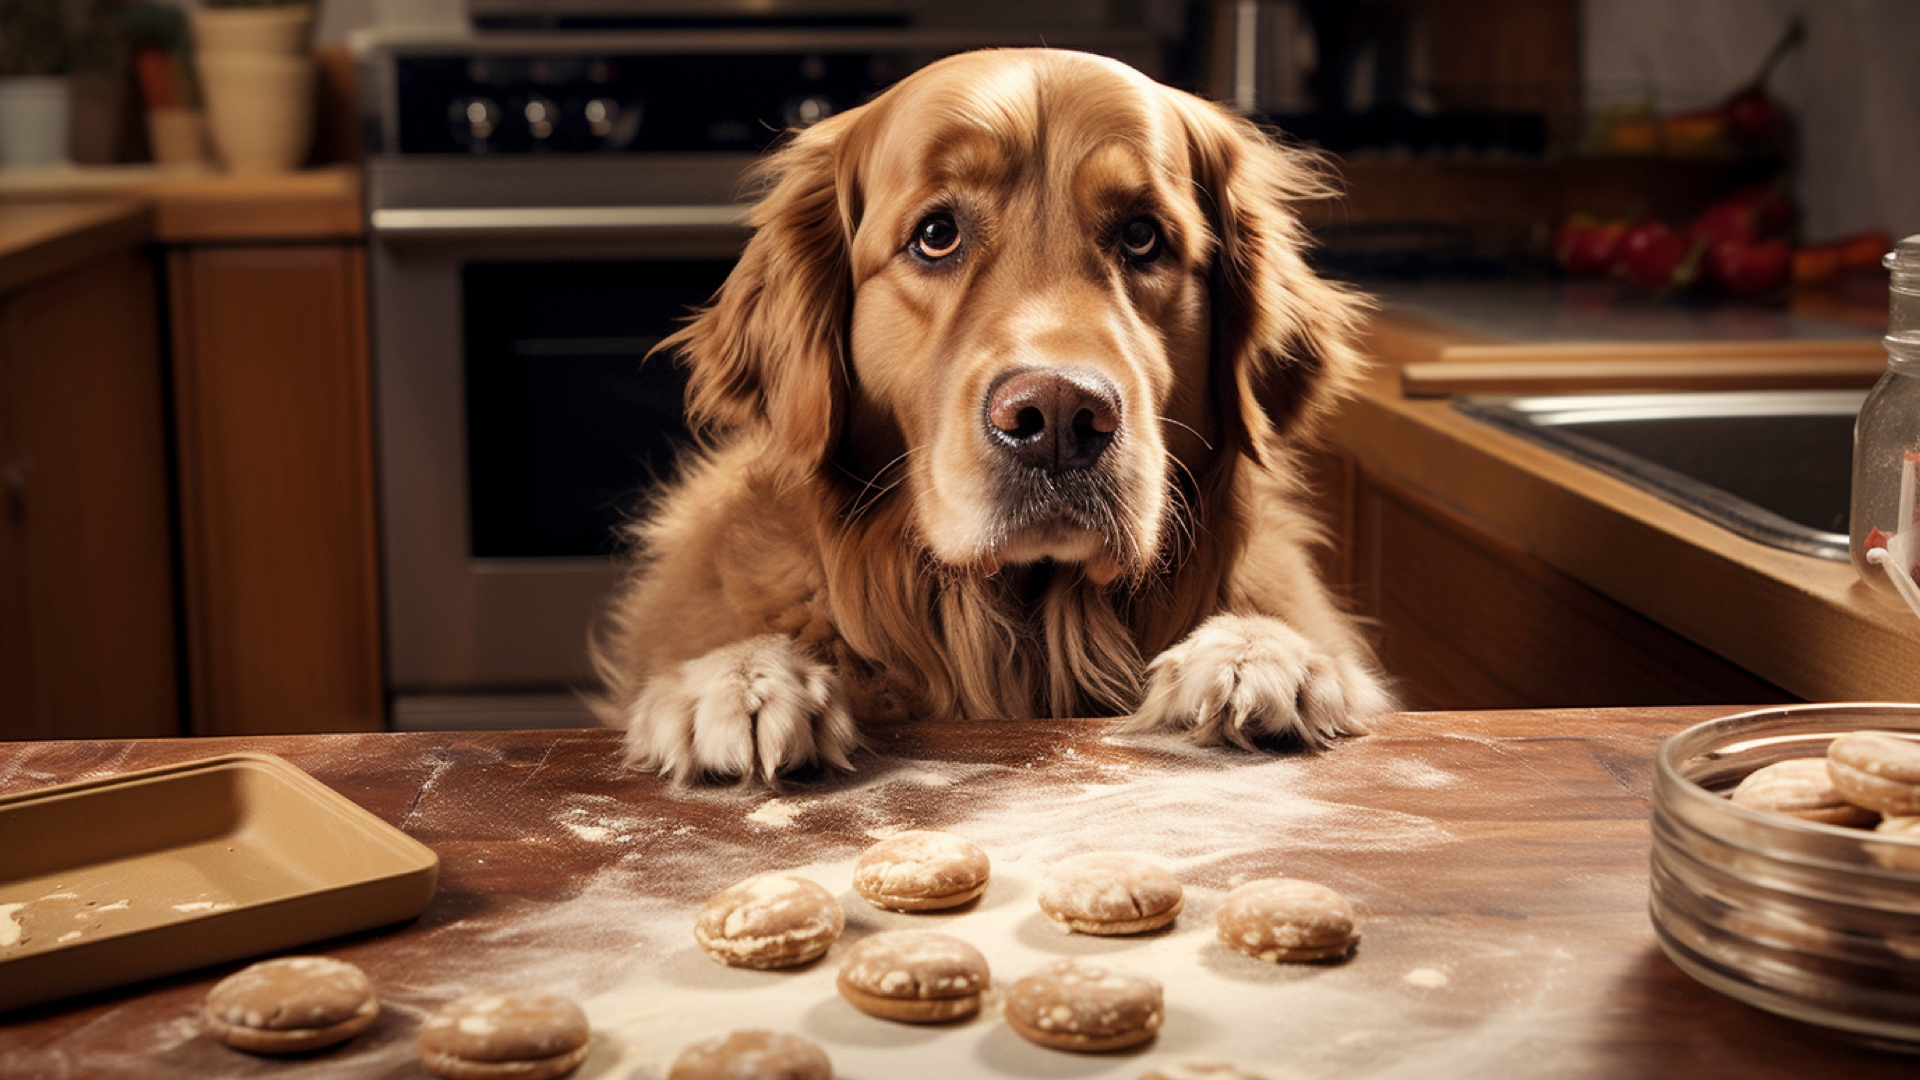 Homemade Treats vs. Store Bought, What's Better for Your Dog's Health?